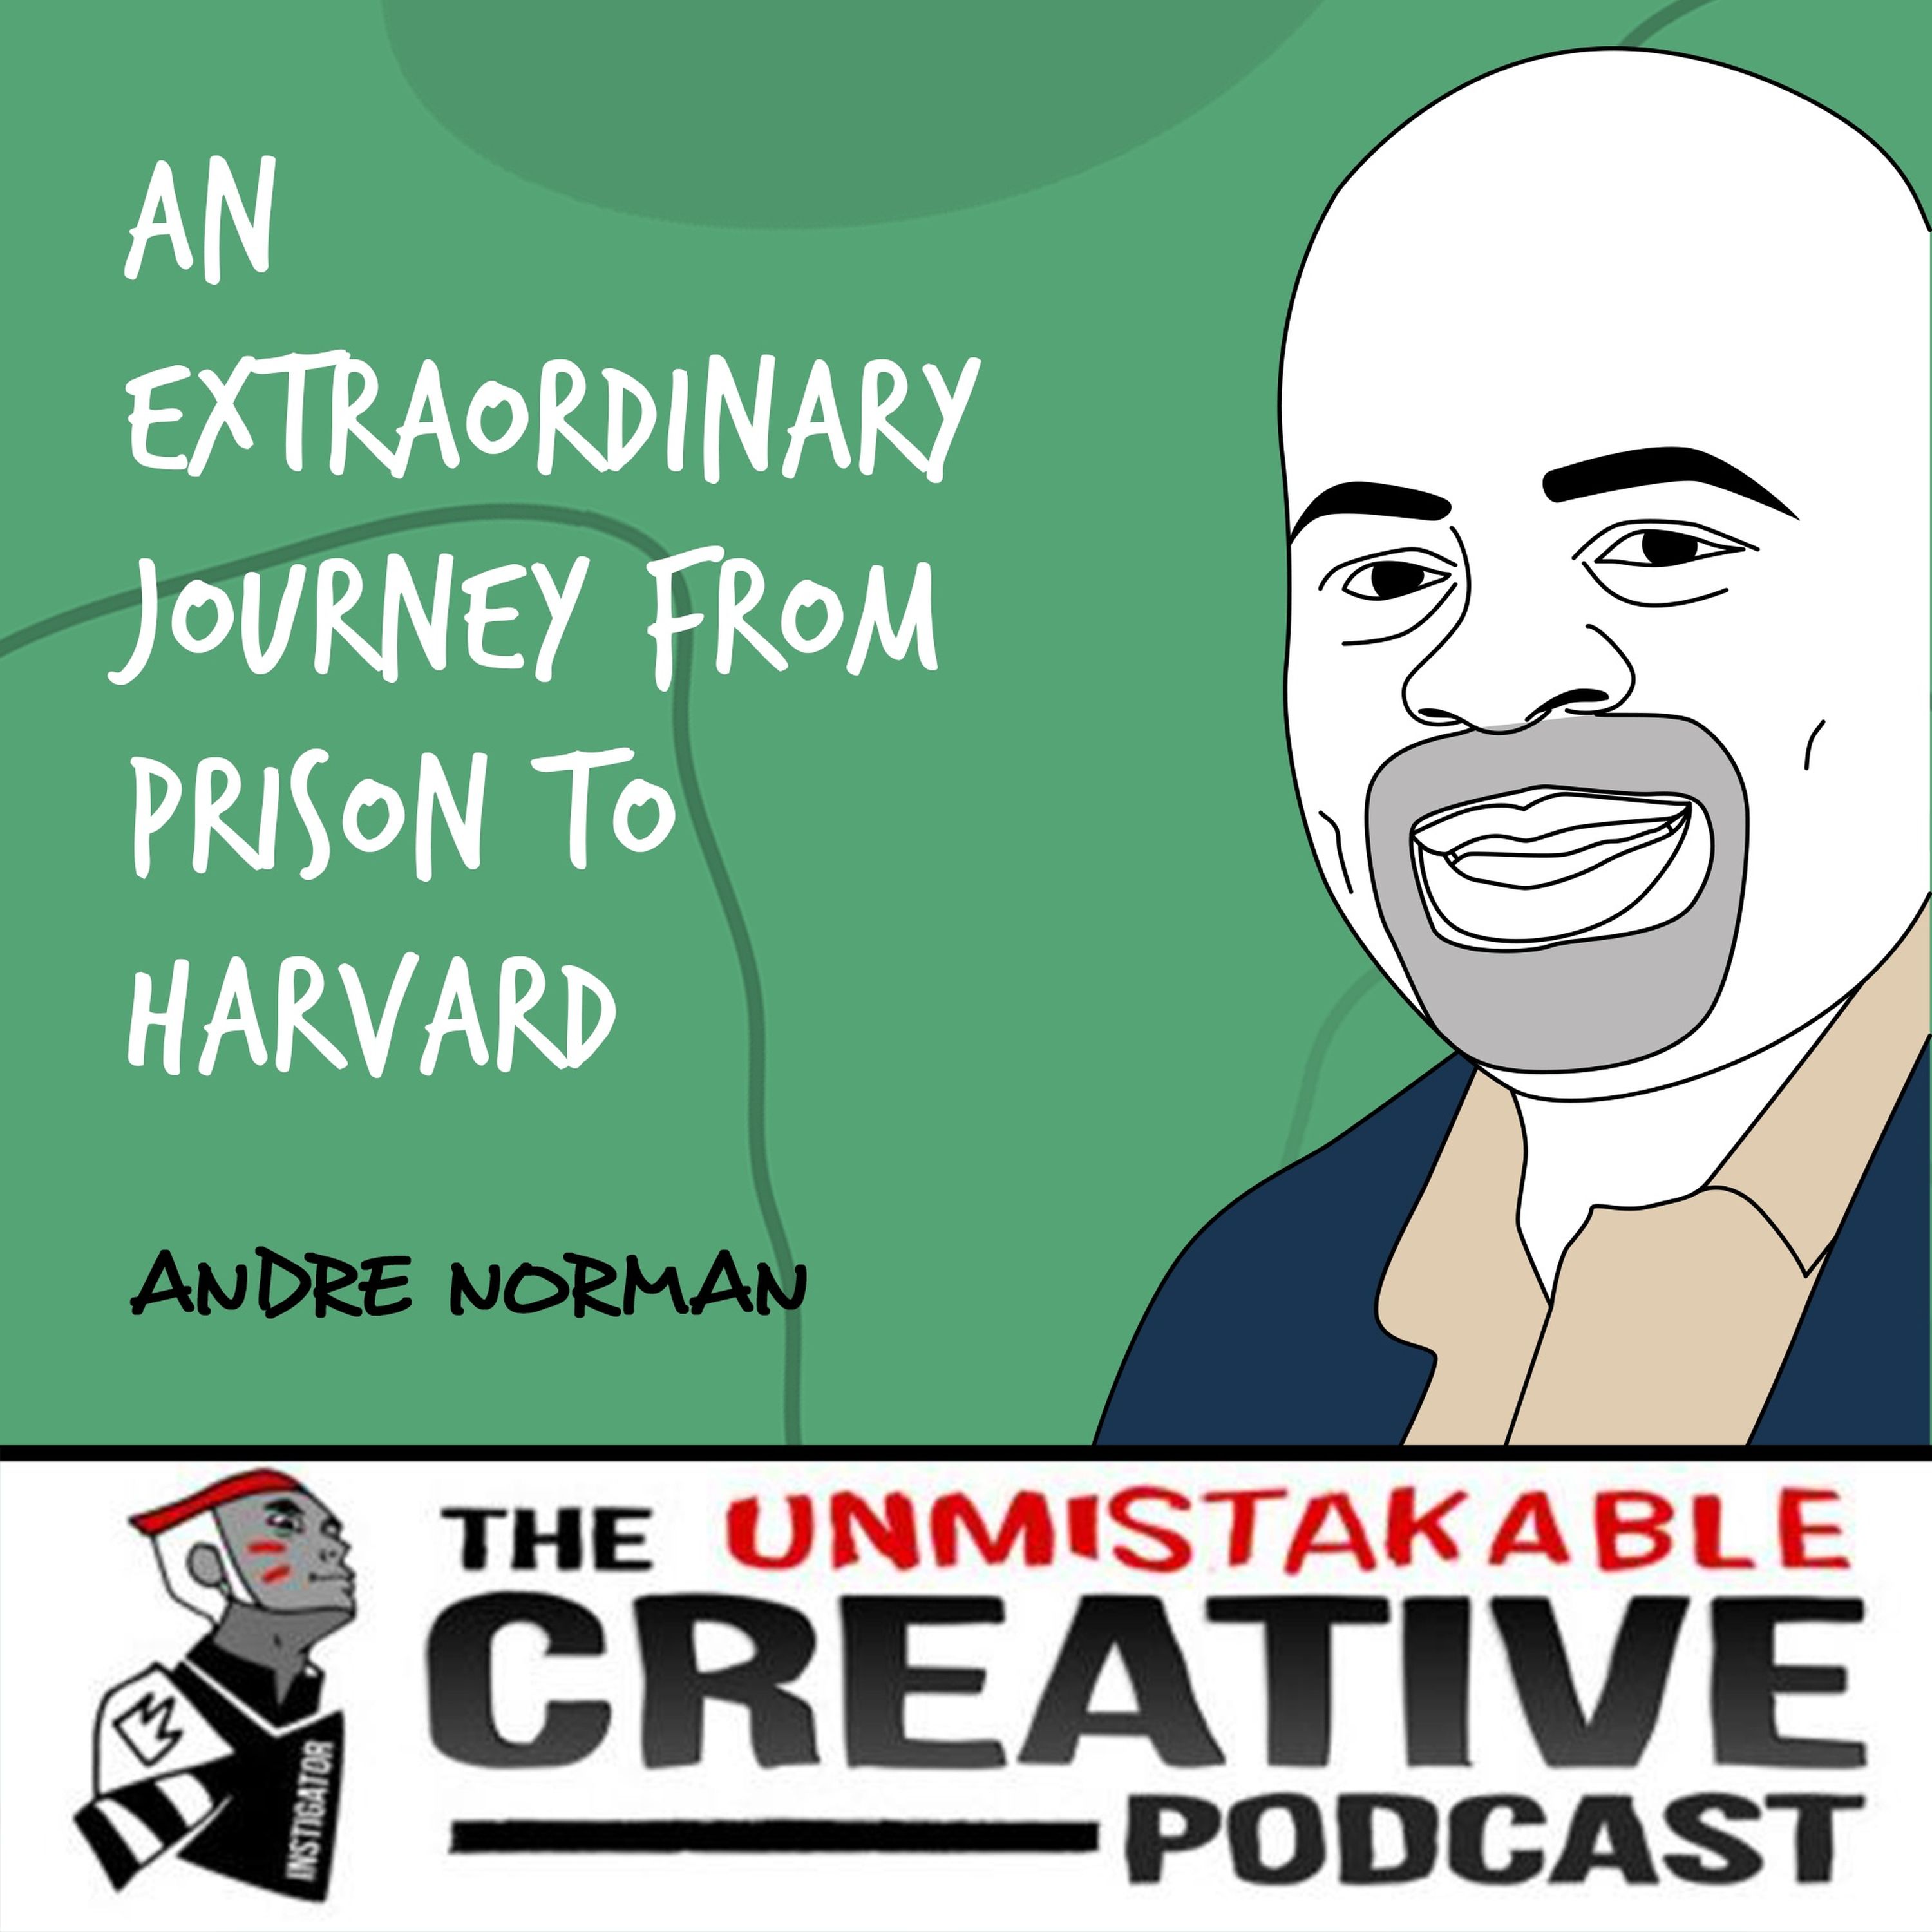 Andre Norman | An Extraordinary Journey from Prison to Harvard